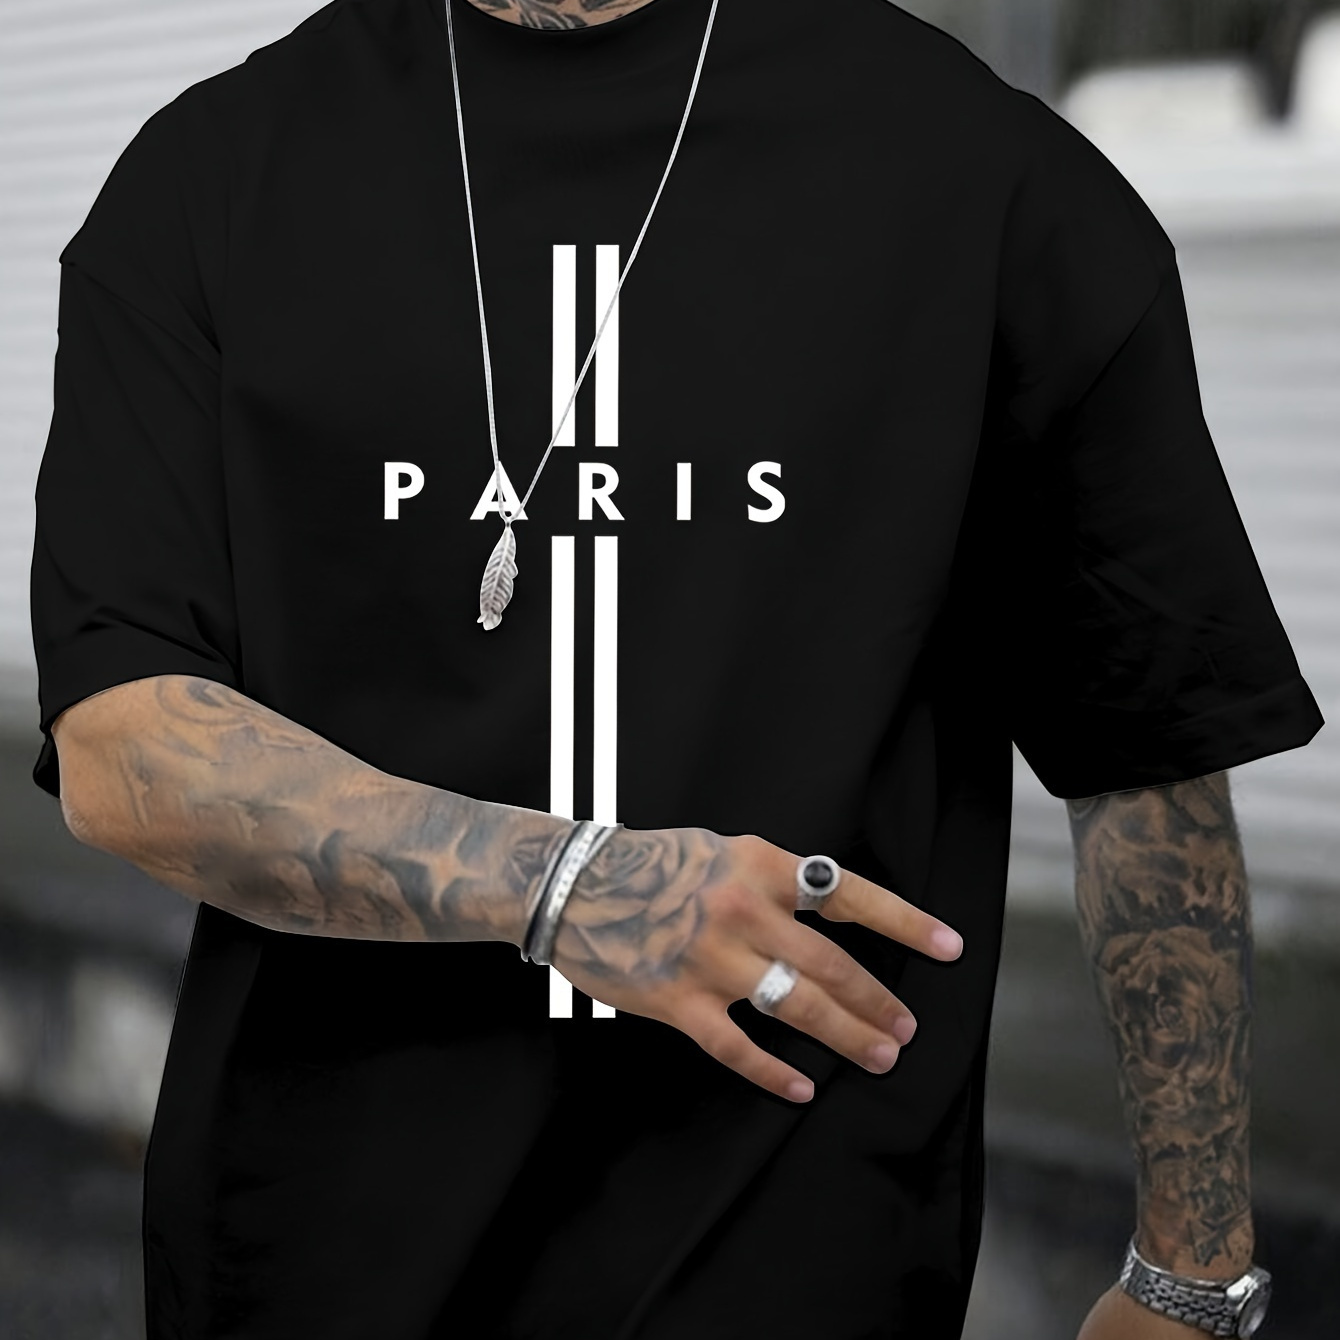 

Paris Creative Stylish Pattern, Men's Round Crew Neck Short Sleeve, Simple Style Tee, Fashion Regular Fit T-shirt, Casual Comfy Top For Spring Summer Holiday Leisure Vacation Men's Clothing As Gift